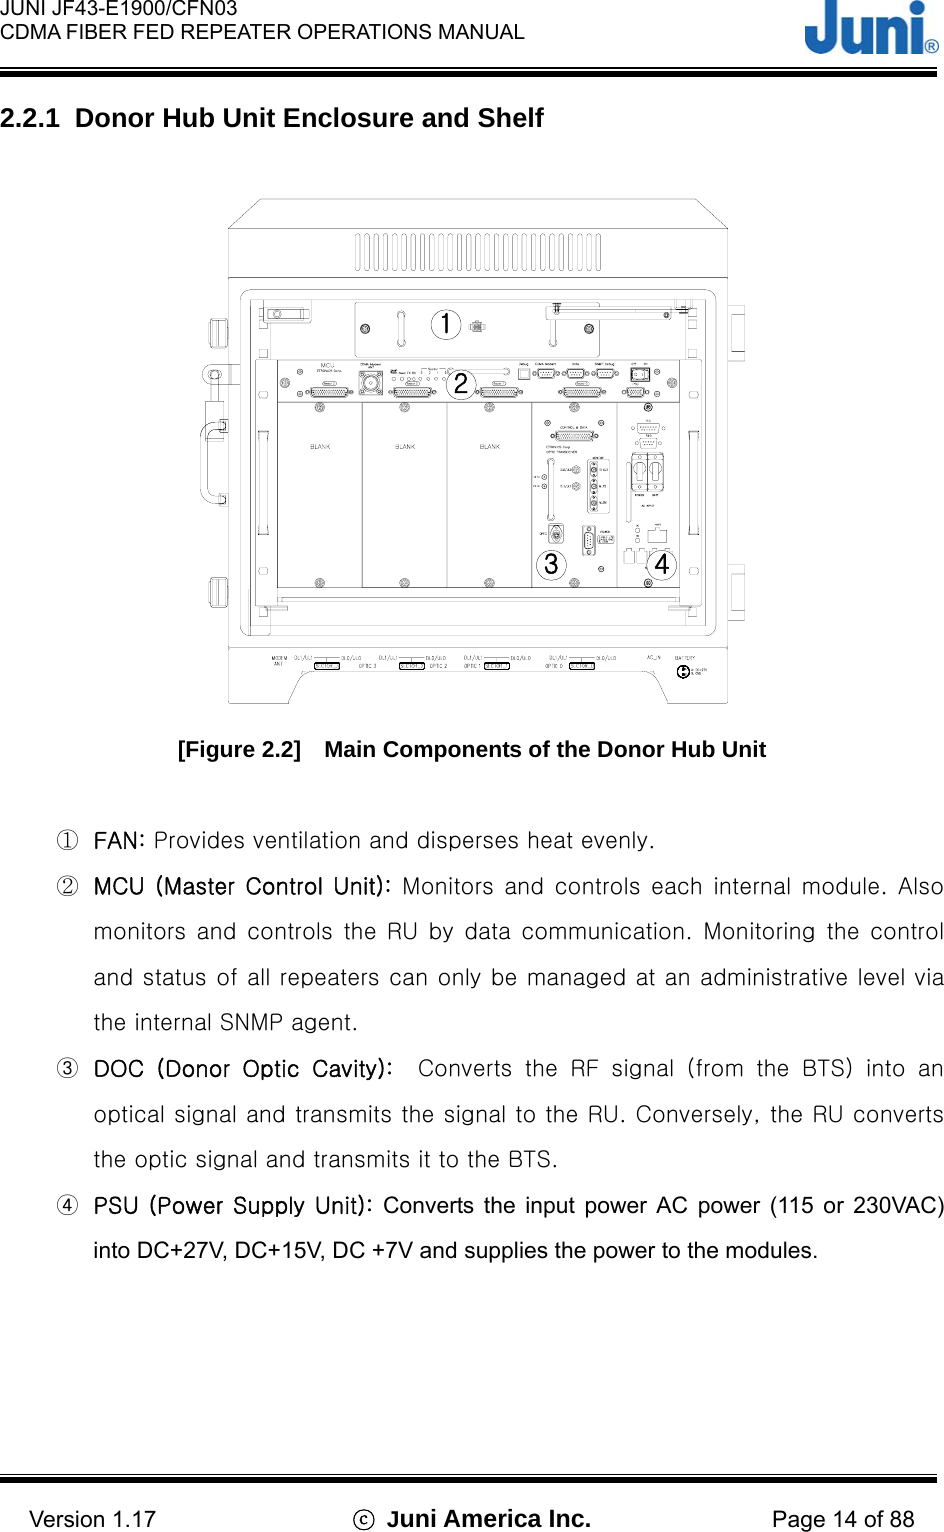  JUNI JF43-E1900/CFN03 CDMA FIBER FED REPEATER OPERATIONS MANUAL                                    Version 1.17  ⓒ Juni America Inc. Page 14 of 88 2.2.1  Donor Hub Unit Enclosure and Shelf  123 4 [Figure 2.2]    Main Components of the Donor Hub Unit  ①  FAN: Provides ventilation and disperses heat evenly.   ②  MCU (Master Control Unit):  Monitors and controls  each internal module.  Also monitors and controls the  RU by data  communication.  Monitoring  the  control and status of all repeaters can only be managed at an administrative level via the internal SNMP agent. ③  DOC  (Donor  Optic  Cavity):    Converts  the  RF  signal  (from  the  BTS)  into  an optical signal and transmits the signal to the RU. Conversely, the RU converts the optic signal and transmits it to the BTS. ④  PSU (Power Supply Unit): Converts the input power AC power (115 or 230VAC) into DC+27V, DC+15V, DC +7V and supplies the power to the modules.  